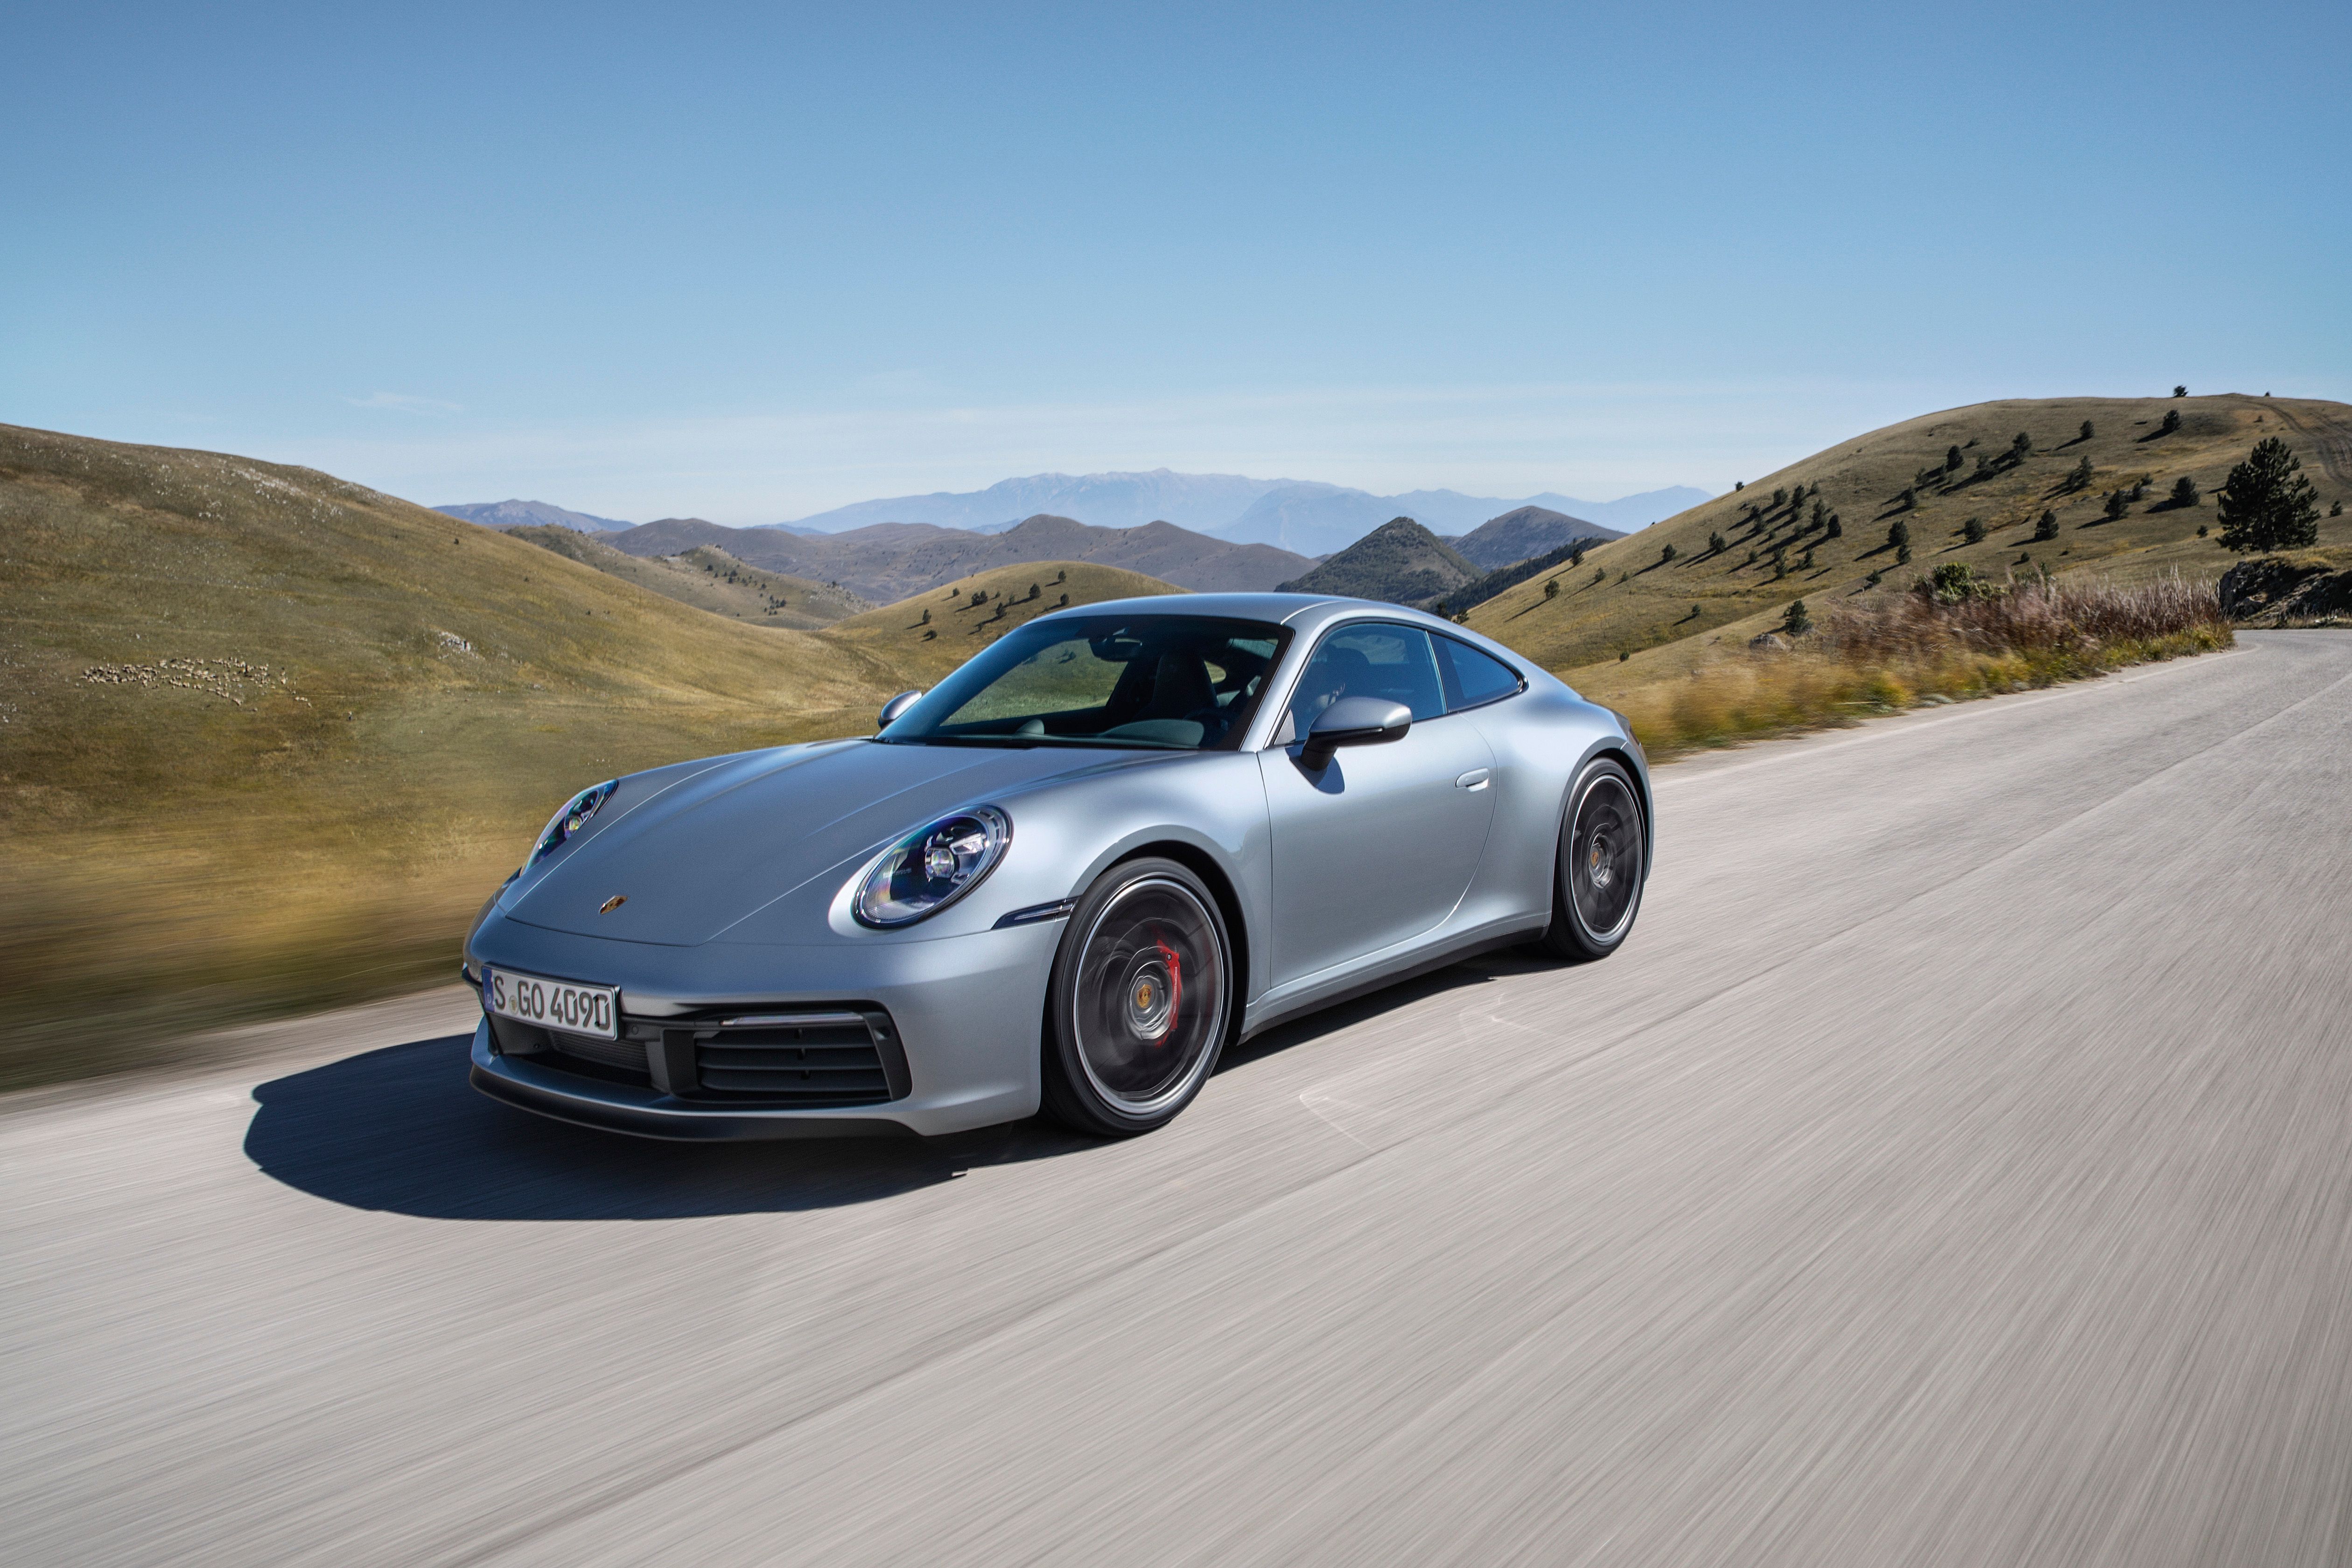 2020 Sorry, Folks, But a Naturally Aspirated Porsche 911 Carrera Isn’t Going to Happen